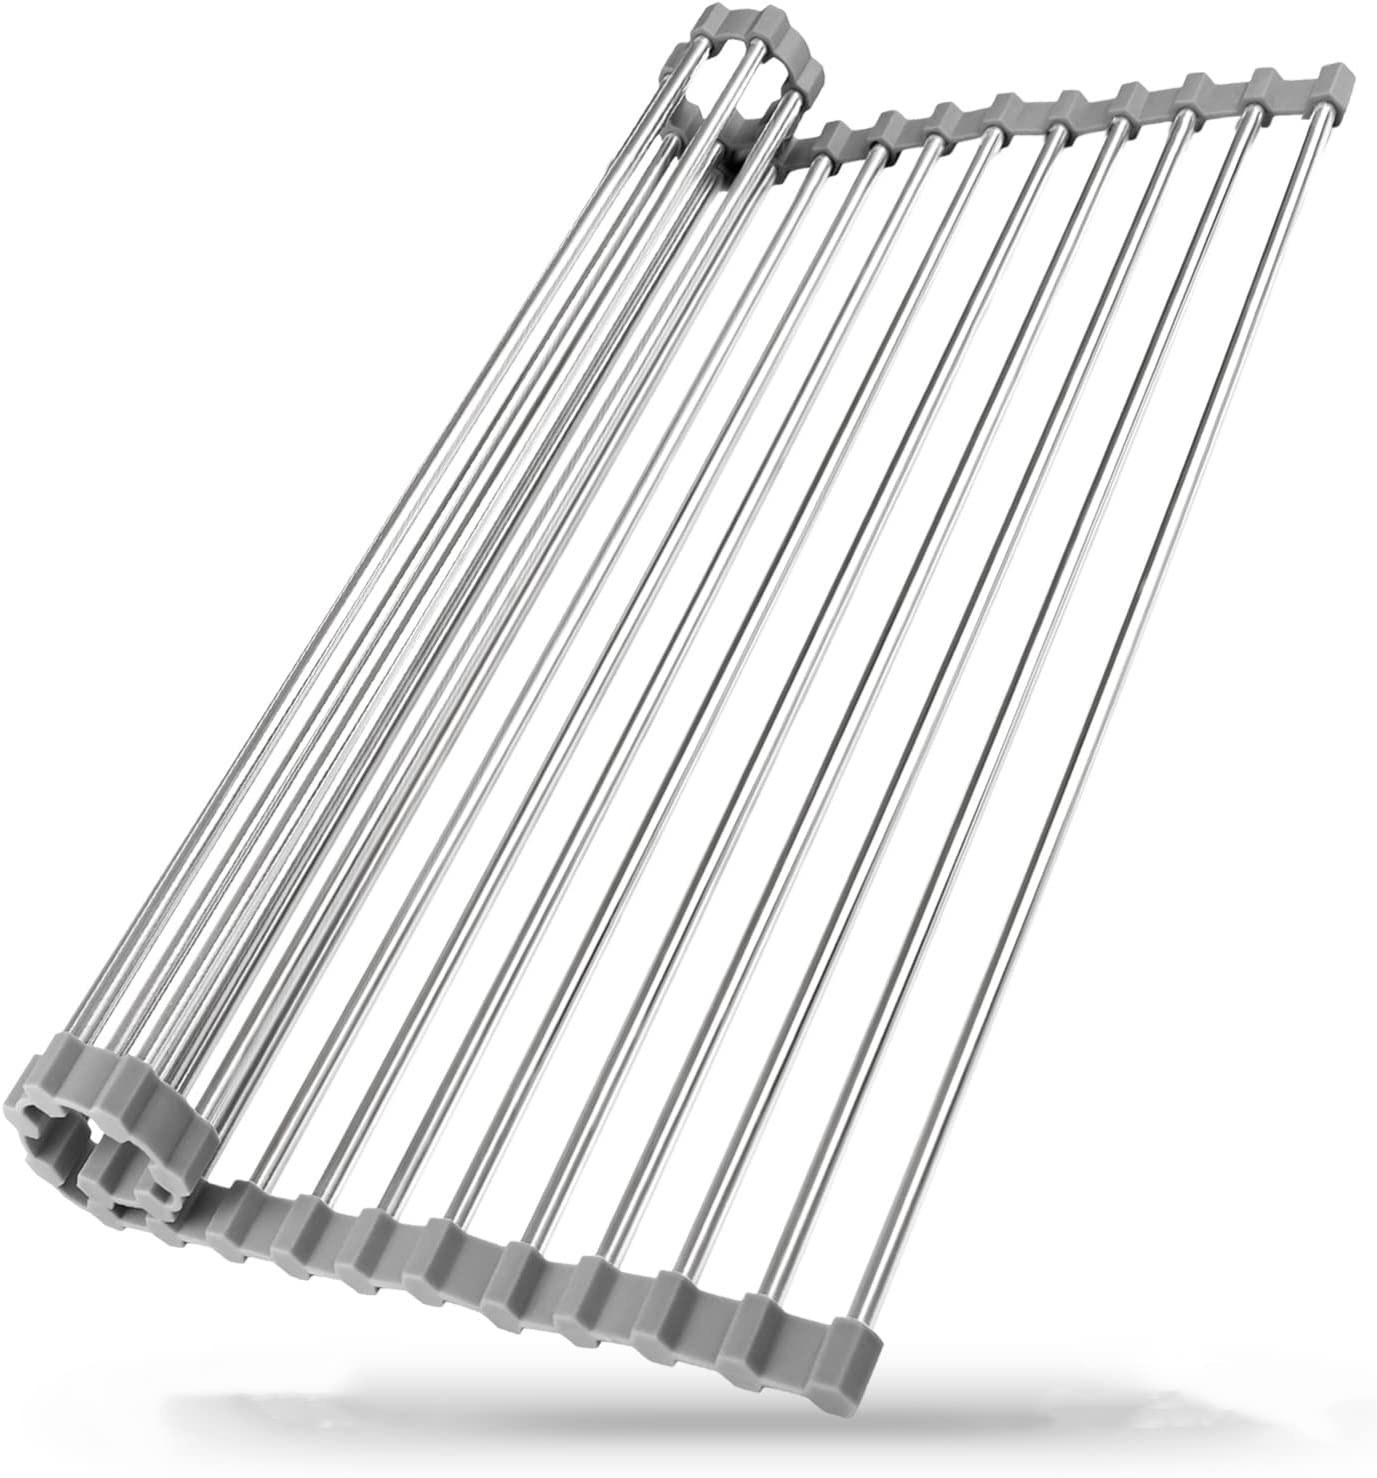 Silver, slatted, rollable rack with round metal dowels